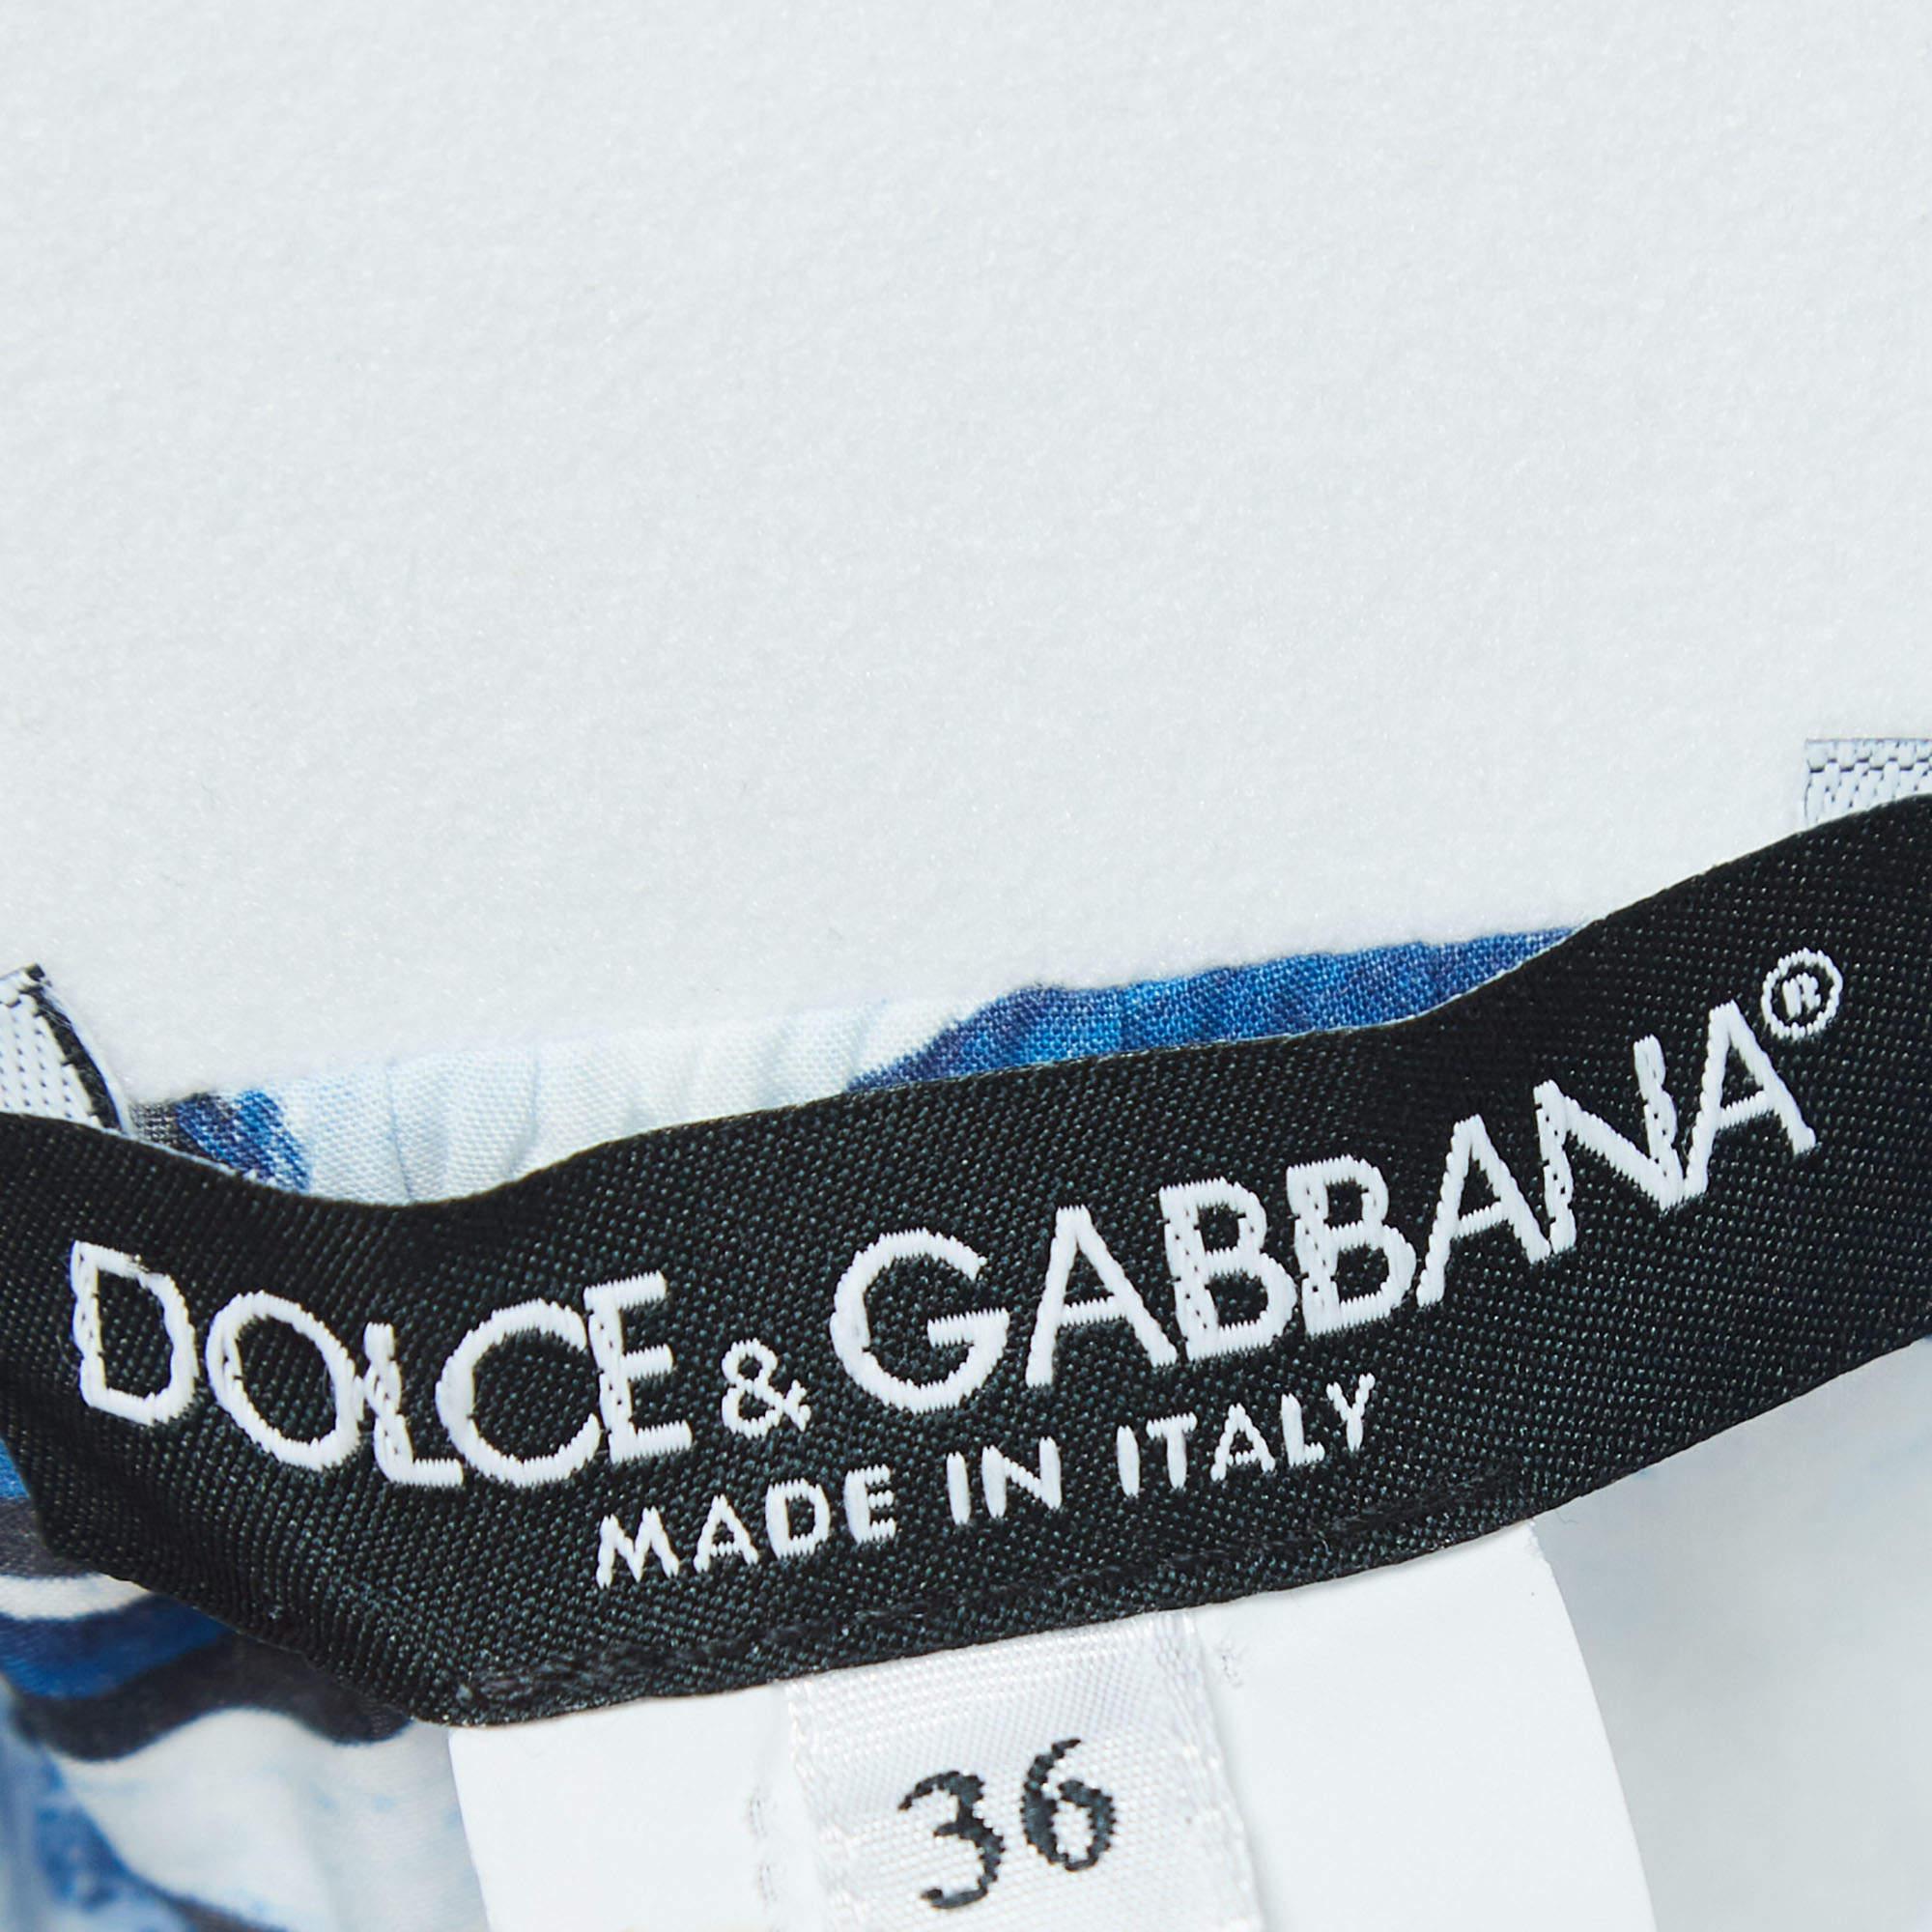 The Dolce & Gabbana maxi skirt is a stunning piece of fashion artistry. Crafted from luxurious cotton, it features a vibrant and intricate majolica print, cascading into tiered layers that gracefully sway with every step, exuding elegance and